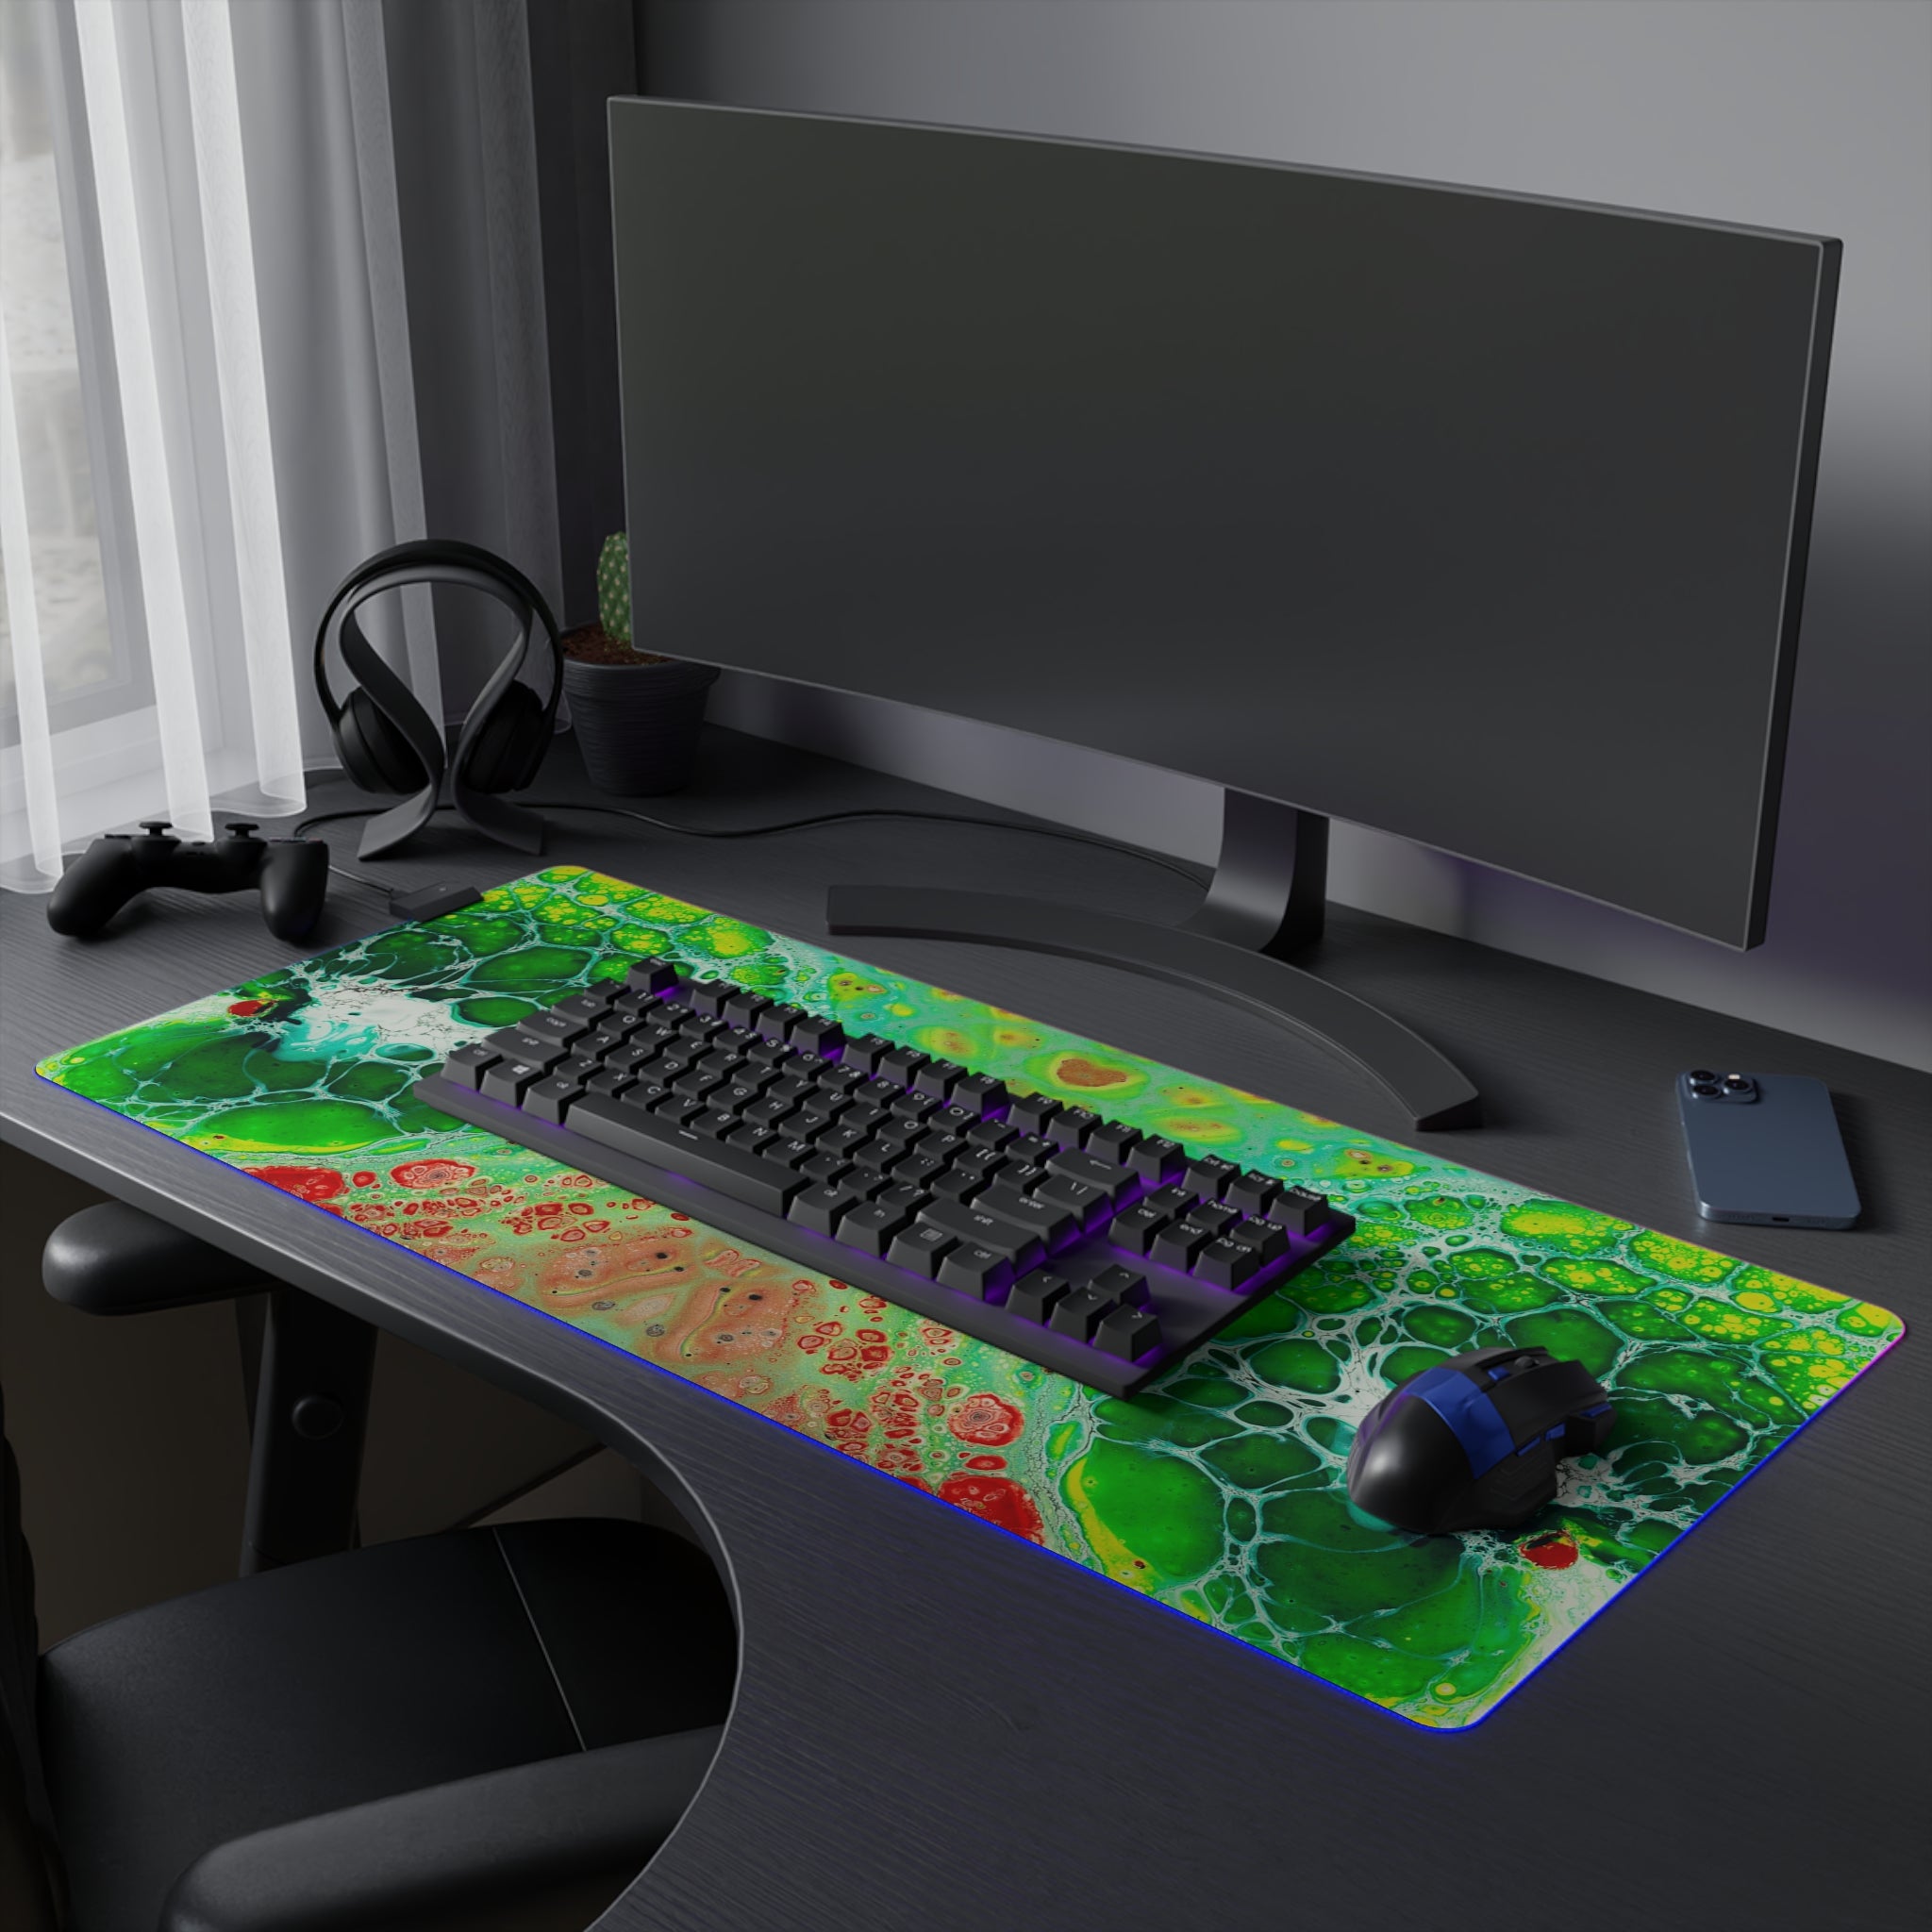 Cameron Creations - LED Gaming Mouse Pad - Up Close - Concept 1